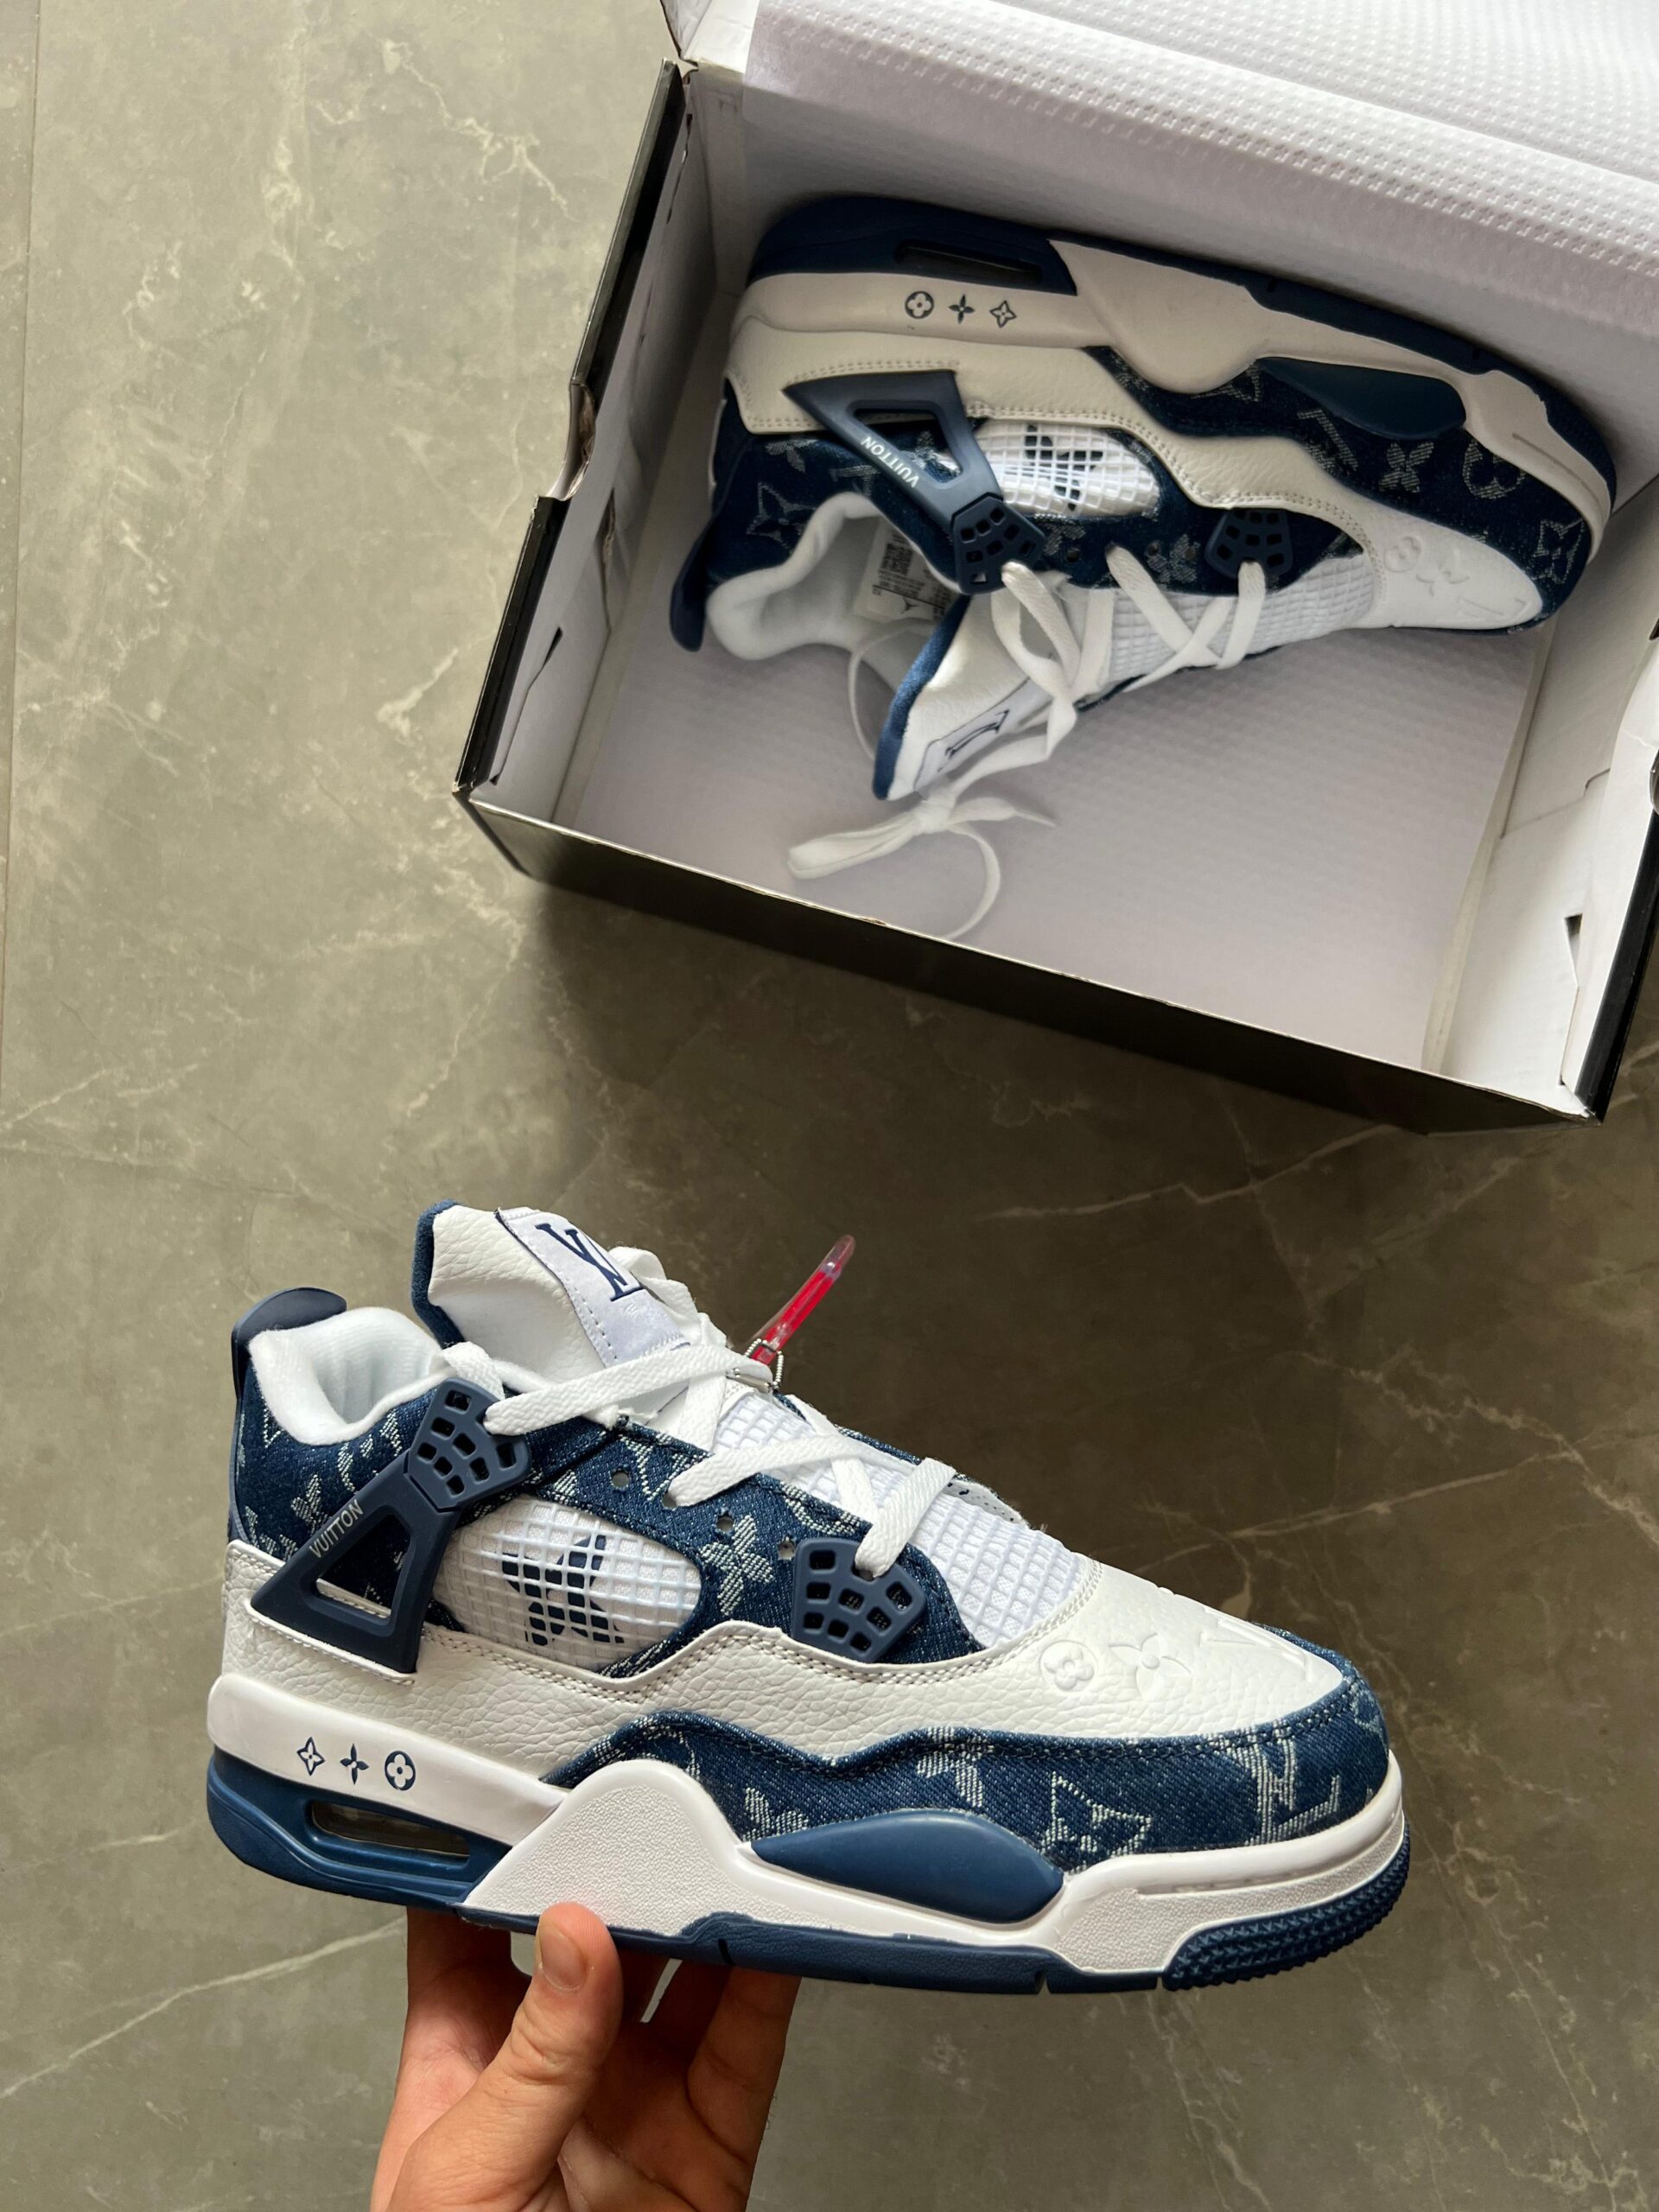 Retro 4 Lv Sneakers For Boys 4 Colors